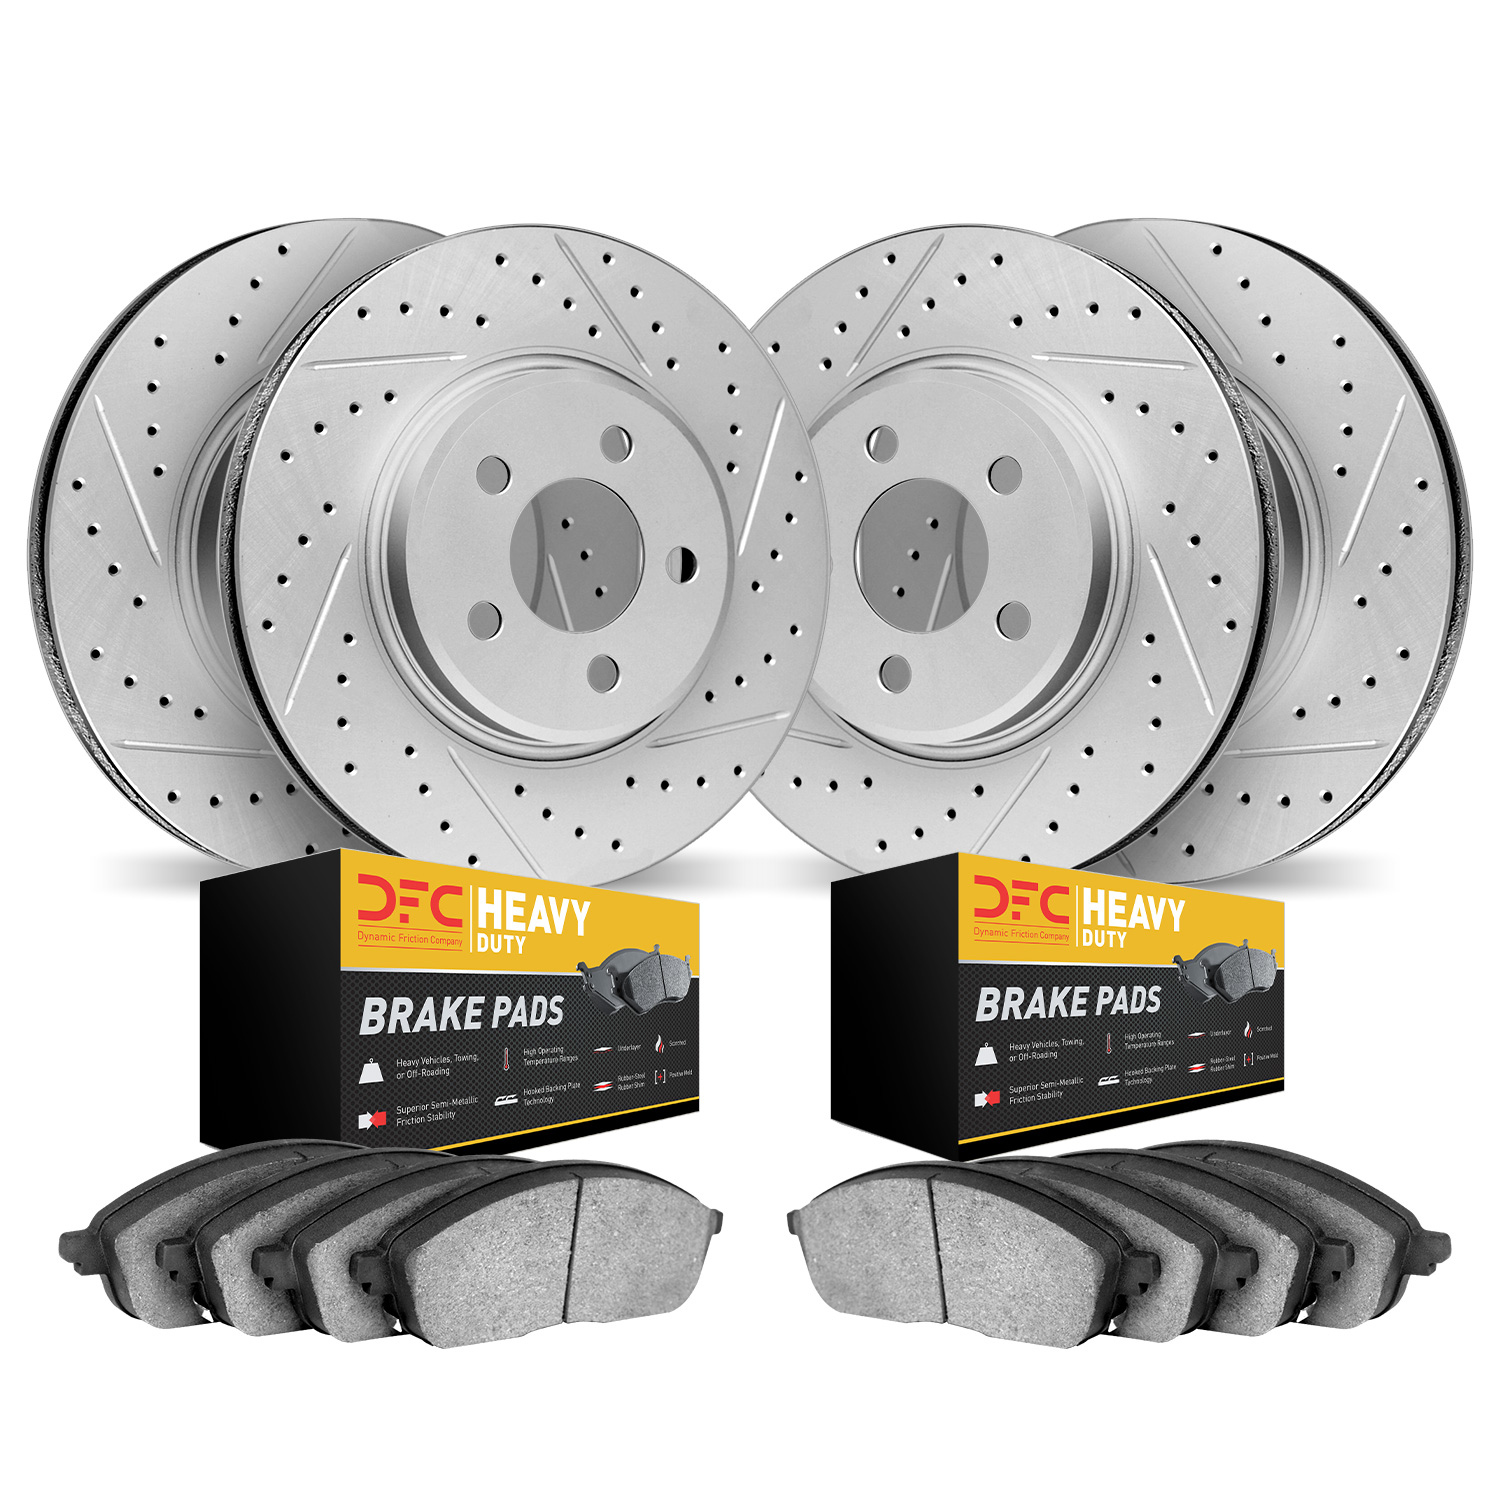 2204-76006 Geoperformance Drilled/Slotted Rotors w/Heavy-Duty Pads Kit, Fits Select Lexus/Toyota/Scion, Position: Front and Rear